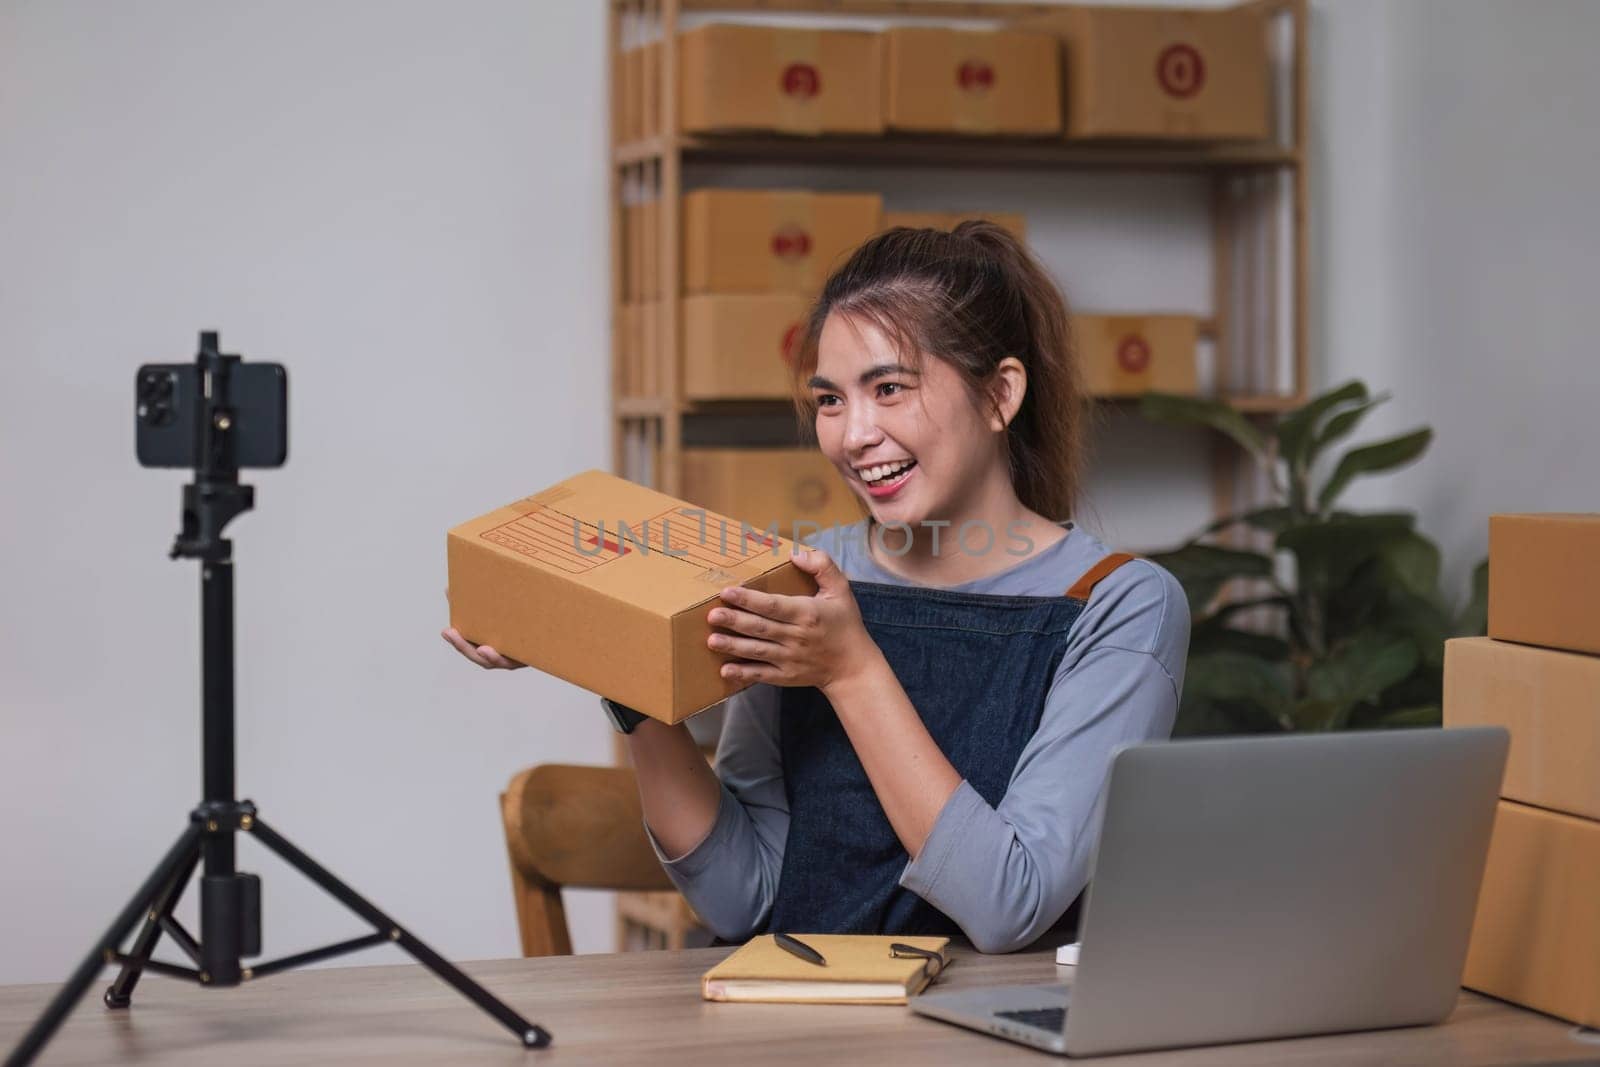 Asian blogger review products and video camera on her phone, sell them online, and showcase her products online on social media. ecommerce business live streaming vlog new normal concept.